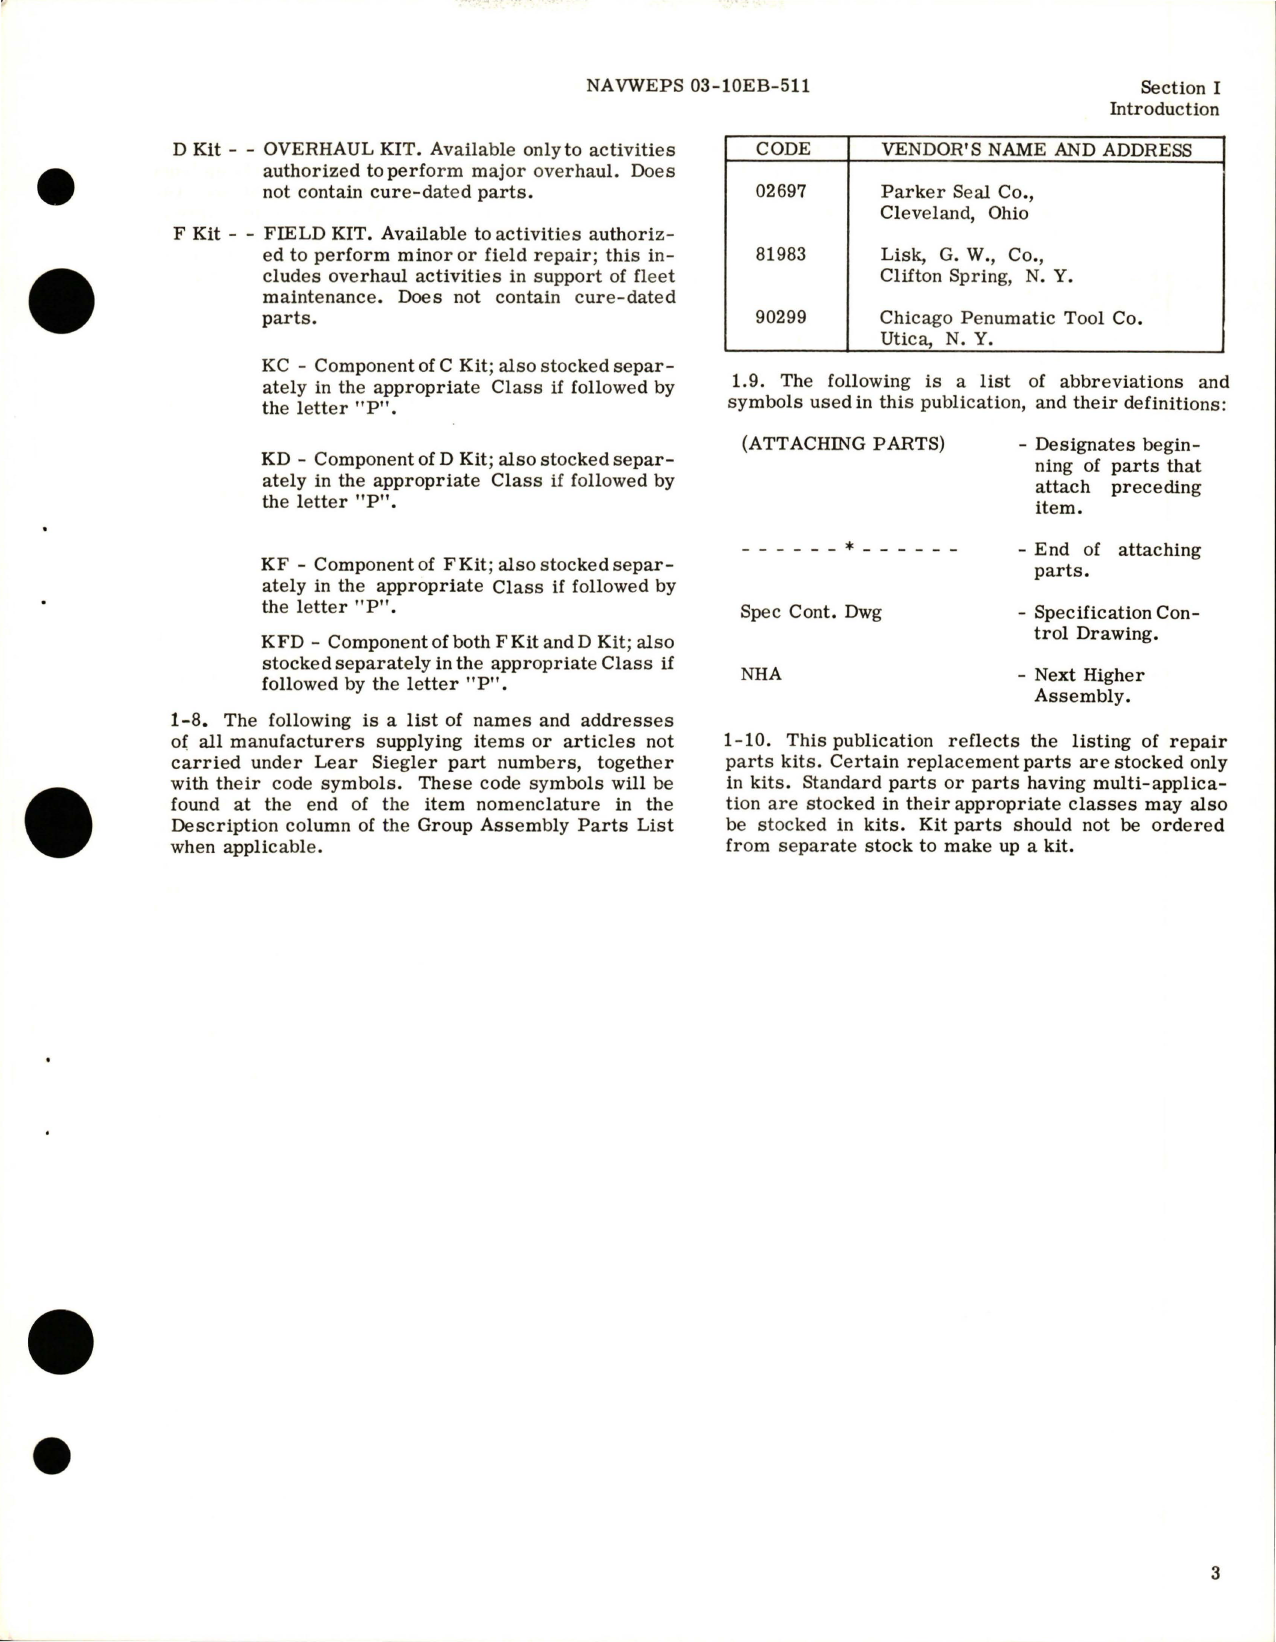 Sample page 5 from AirCorps Library document: Illustrated Parts Breakdown for Centrifugal Fuel Booster Pump - Models RG11250, RG11250A, and RG11250A1 